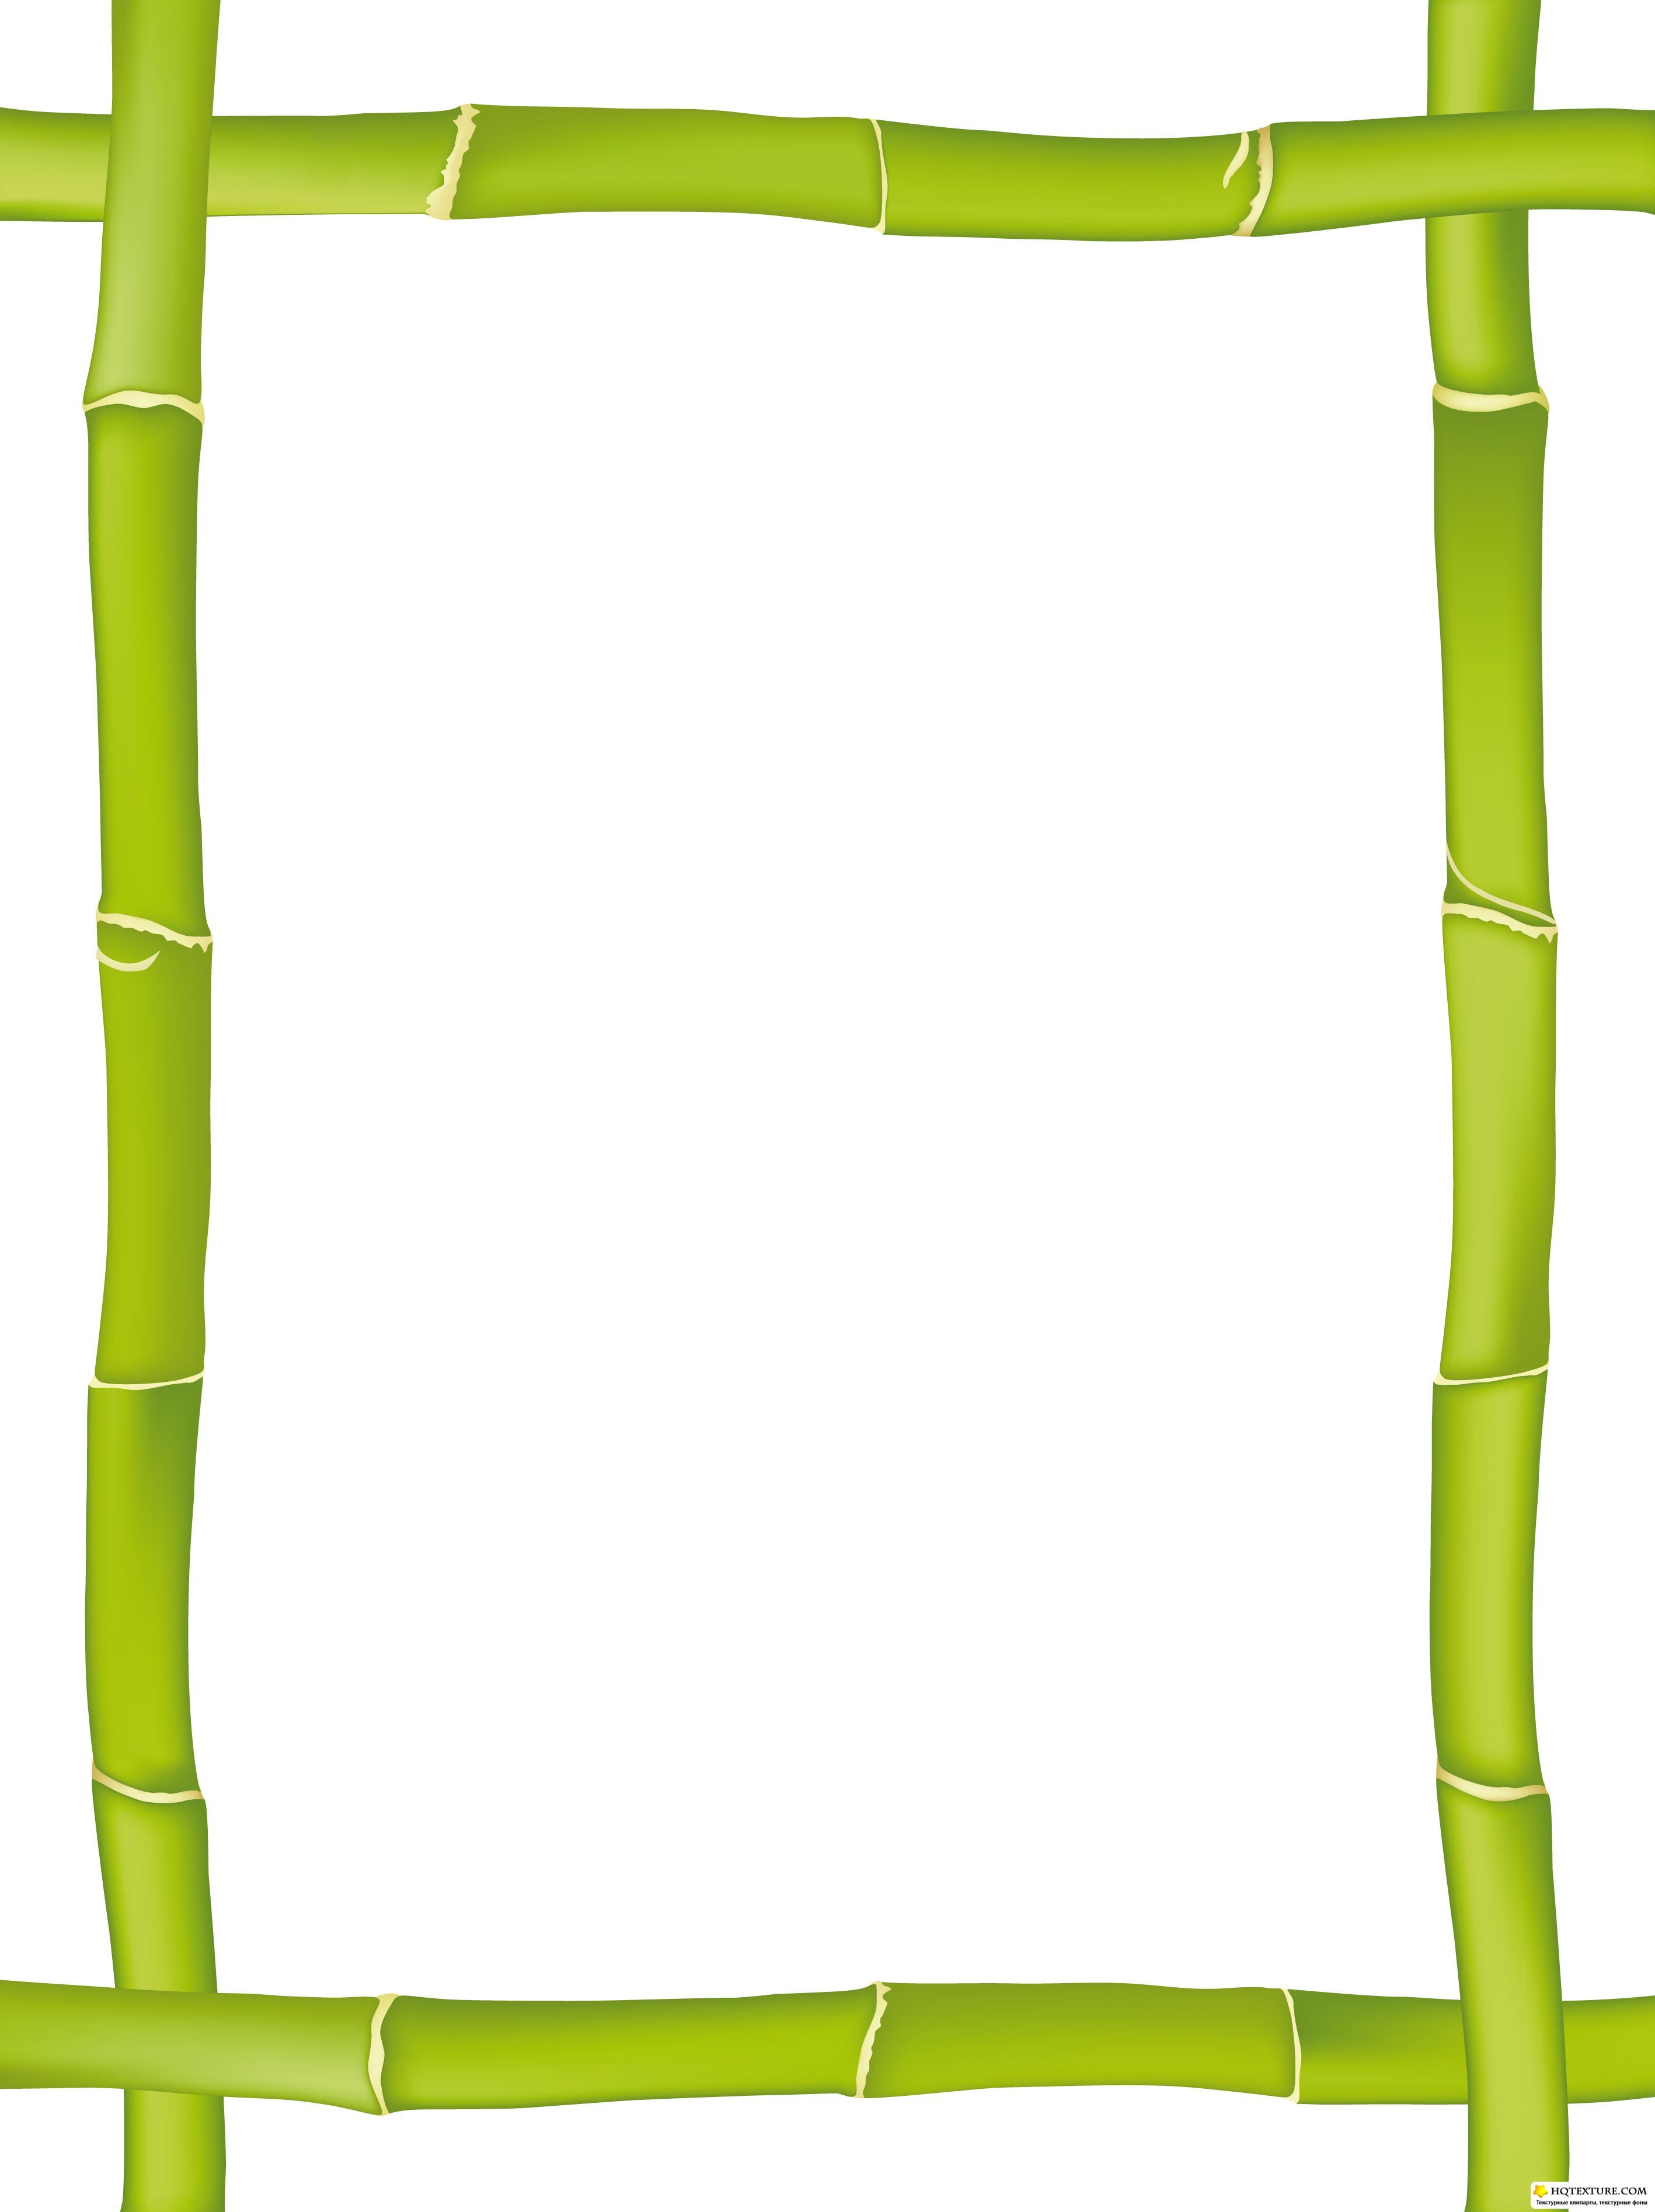 bamboo clipart picture frame